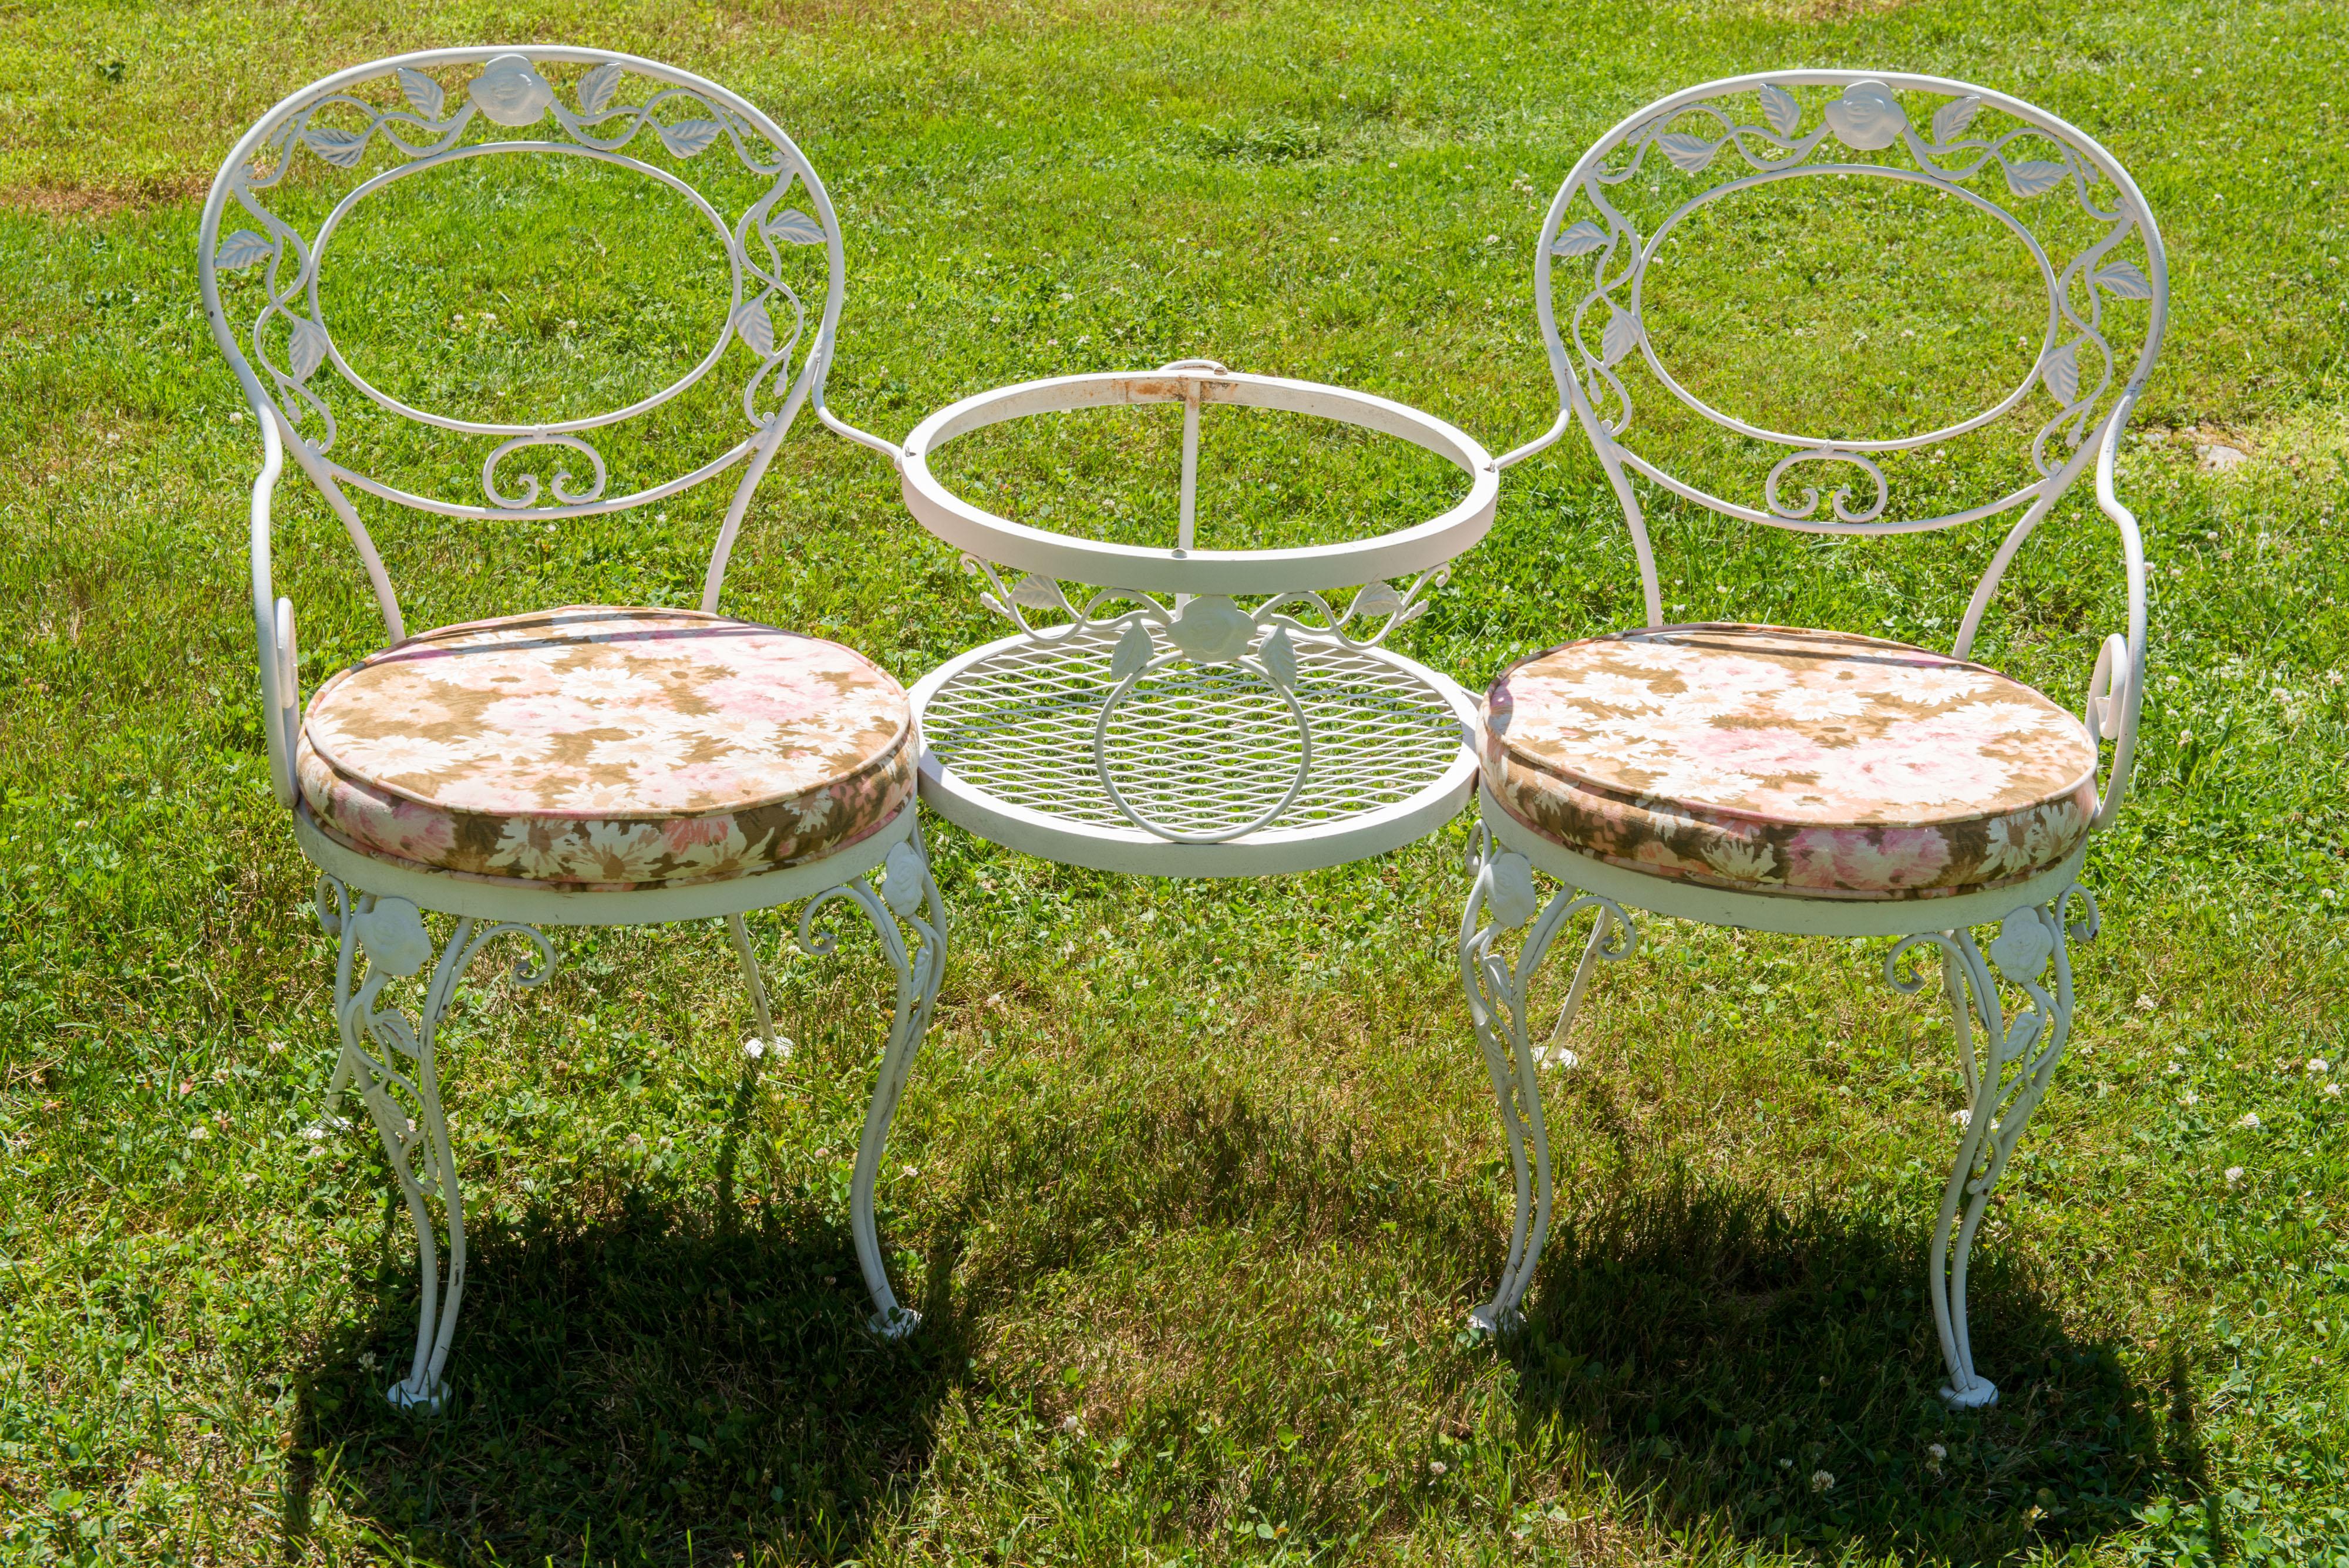 This is the classic vintage Woodard Chantilly Rose wrought iron Tete a Tete - a pair of attached arm chairs with a small round glass top table between them. At the back of the table there are two iron rings to accommodate a shade umbrella. The glass